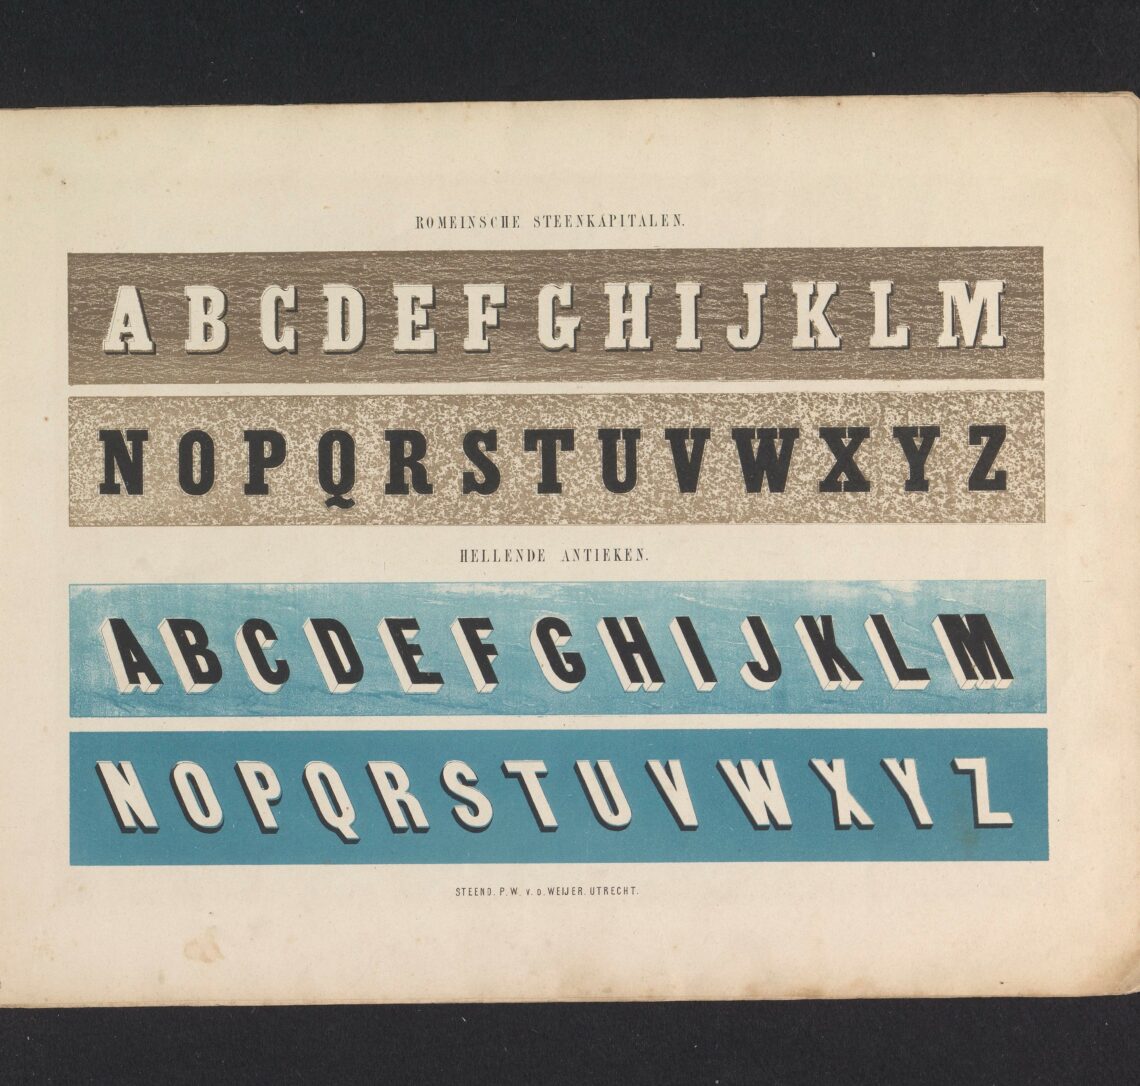 An old book page on which the entire alphabet is printed twice in capital letters. The alphabets differ in font and are highlighted in gray at the top and blue at the bottom.